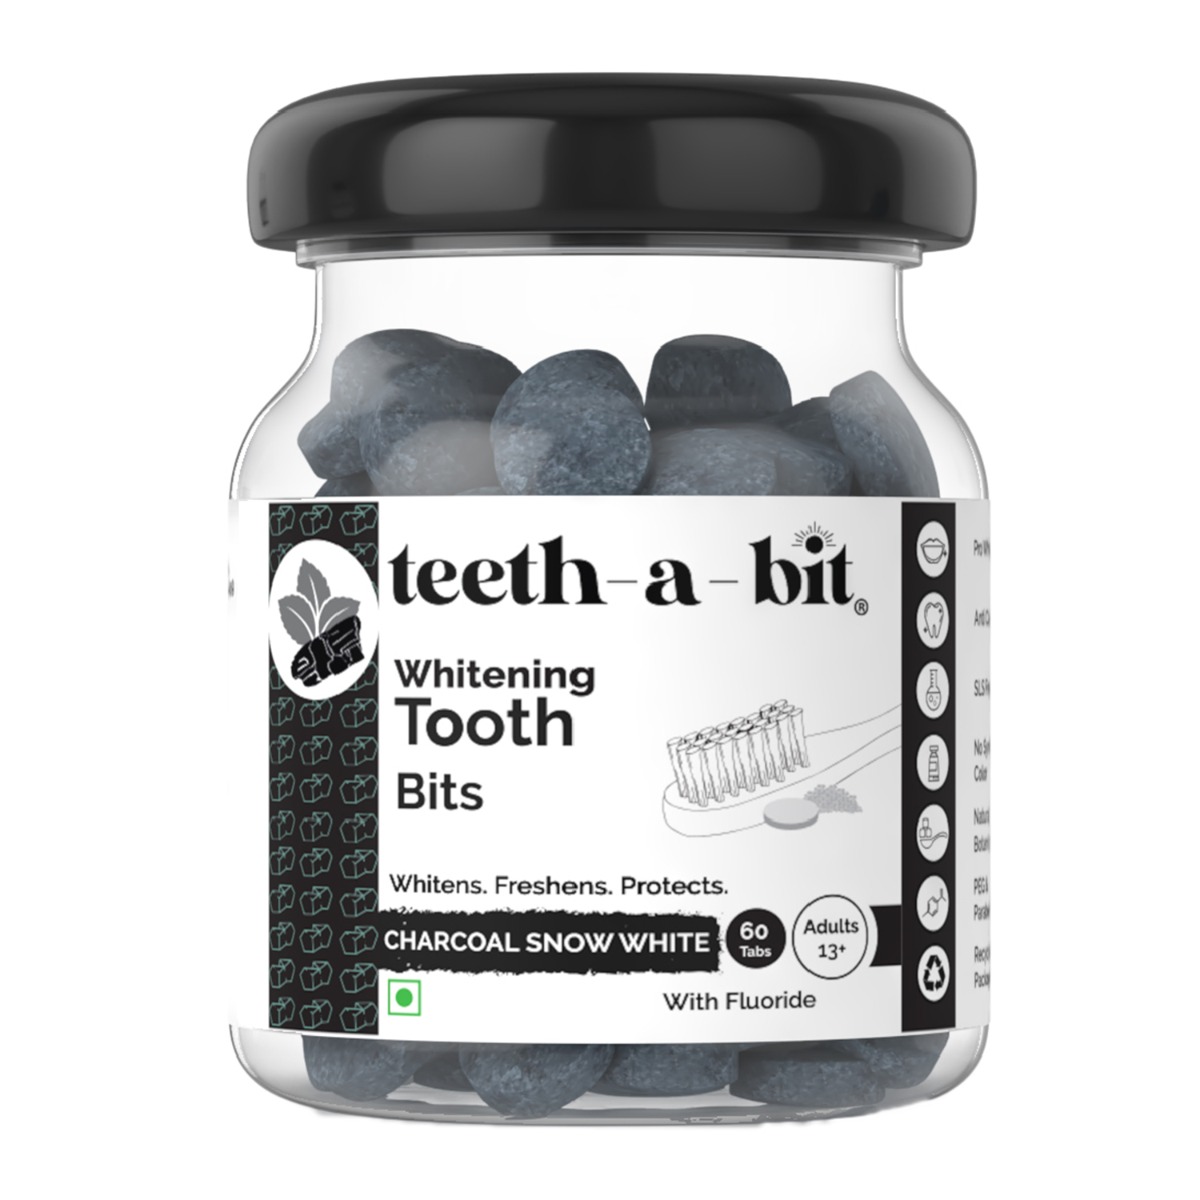 teeth-a-bit Whitening Bamboo Charcoal Snow White Toothpaste Tablets, 60 Count